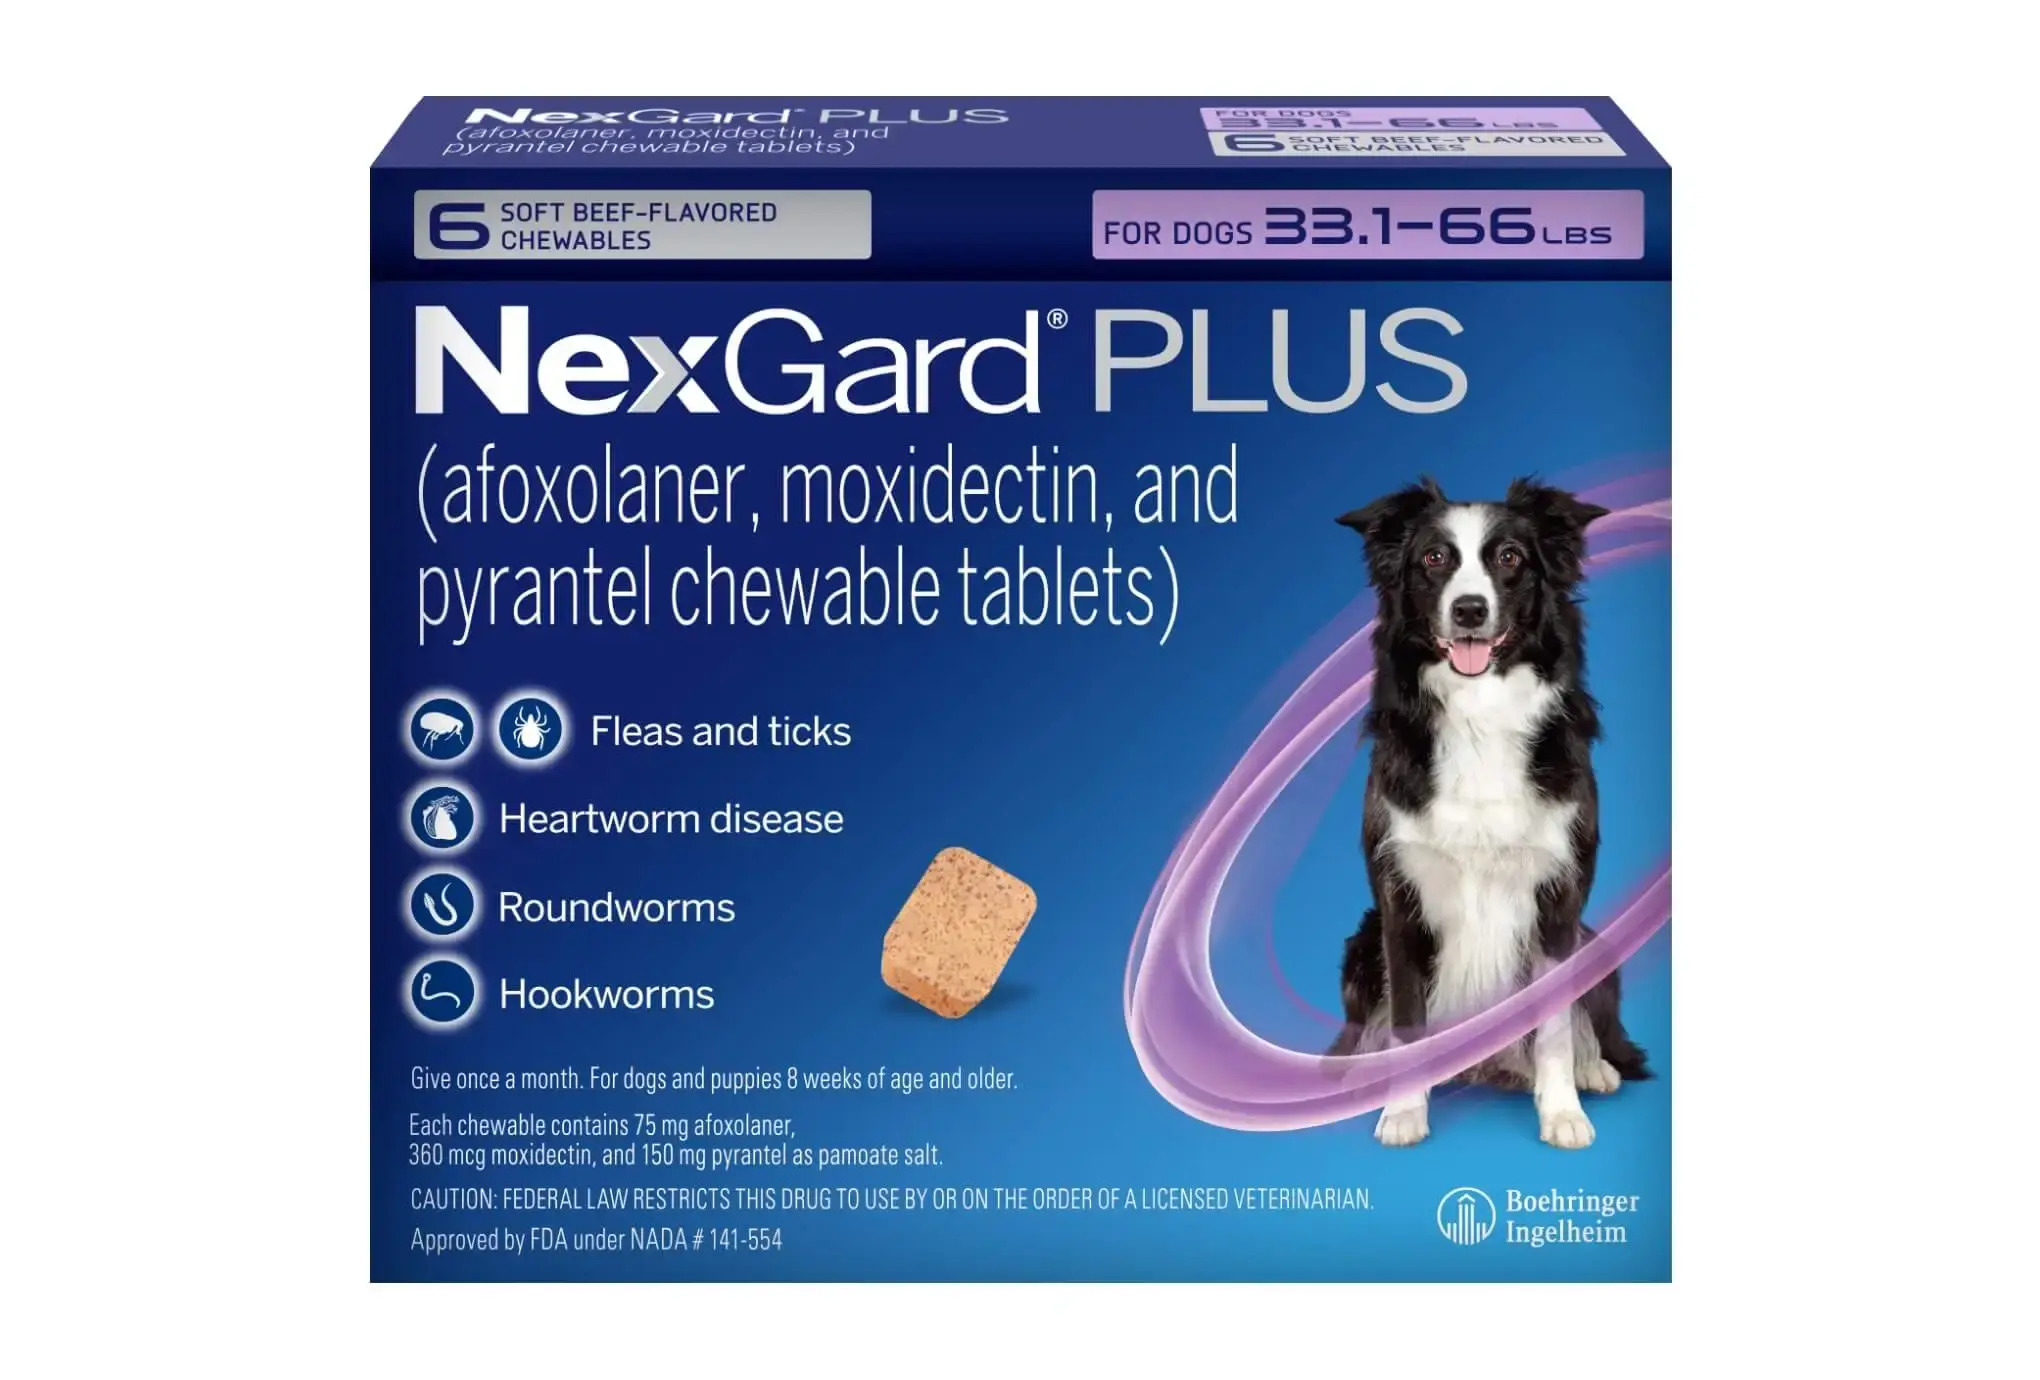 NexGard Plus Pack Shot Box. Features a dog on the cover of the box